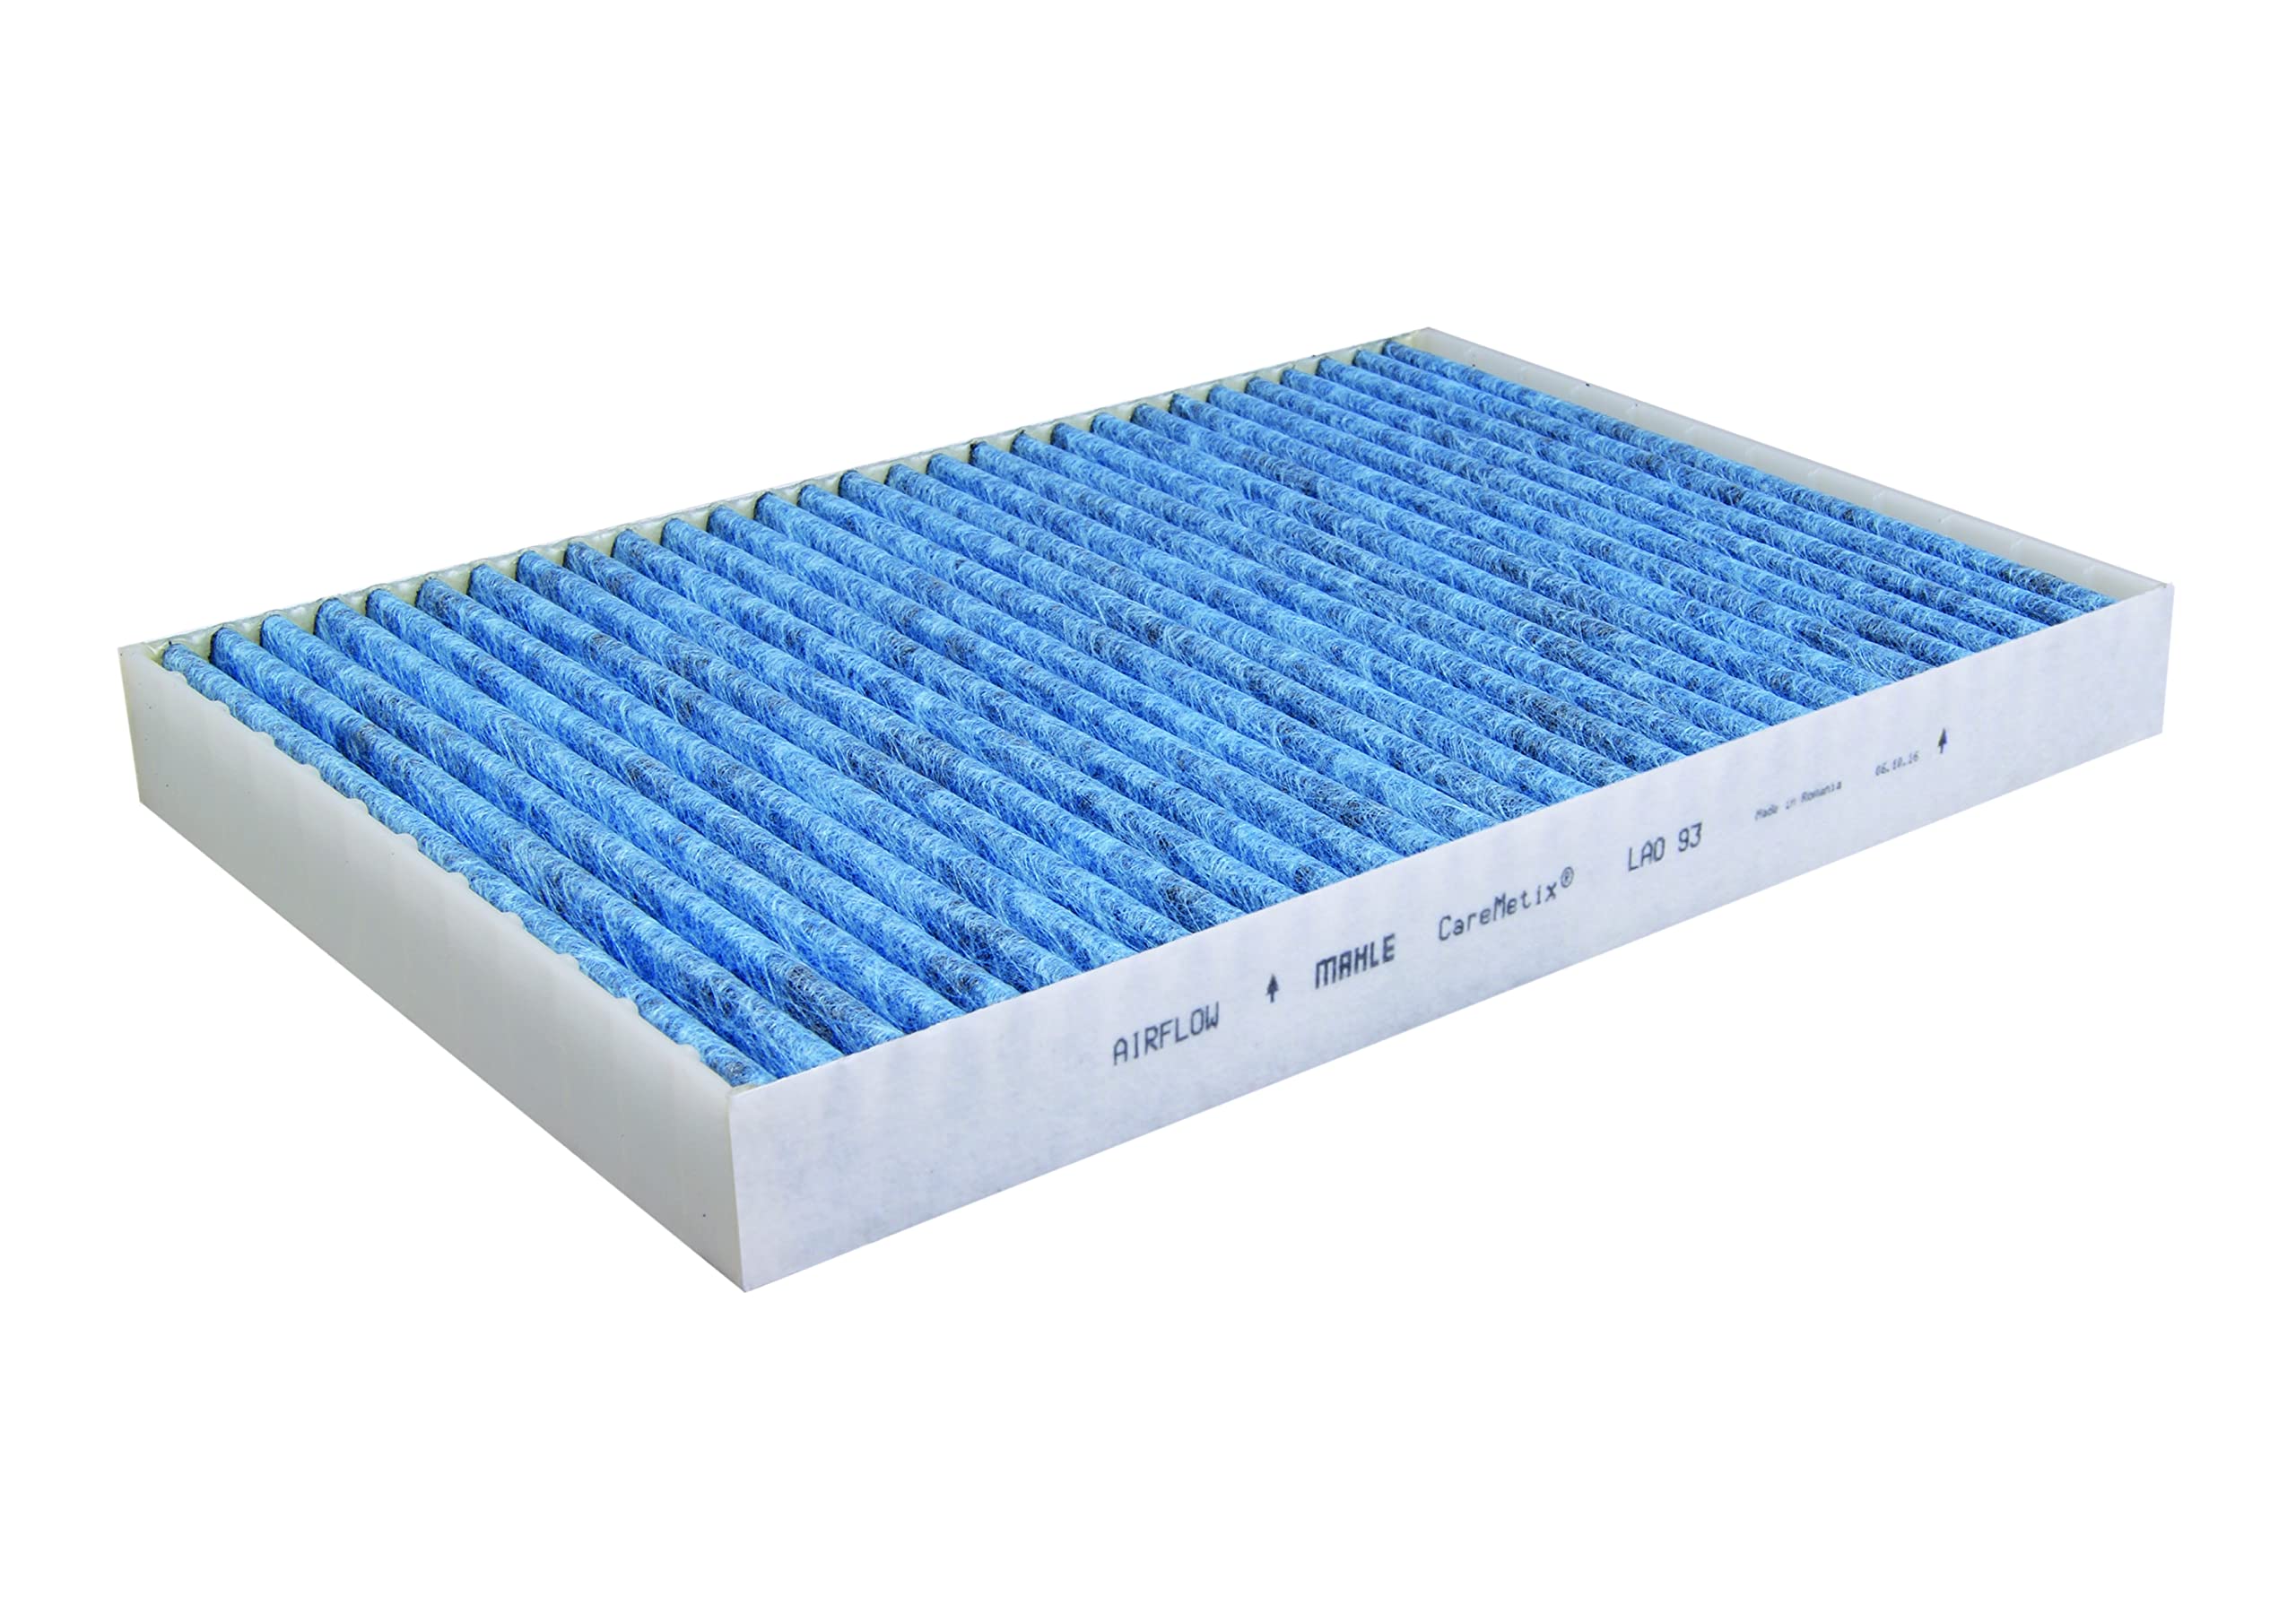 MAHLE Cabin Air Filter LAO 93